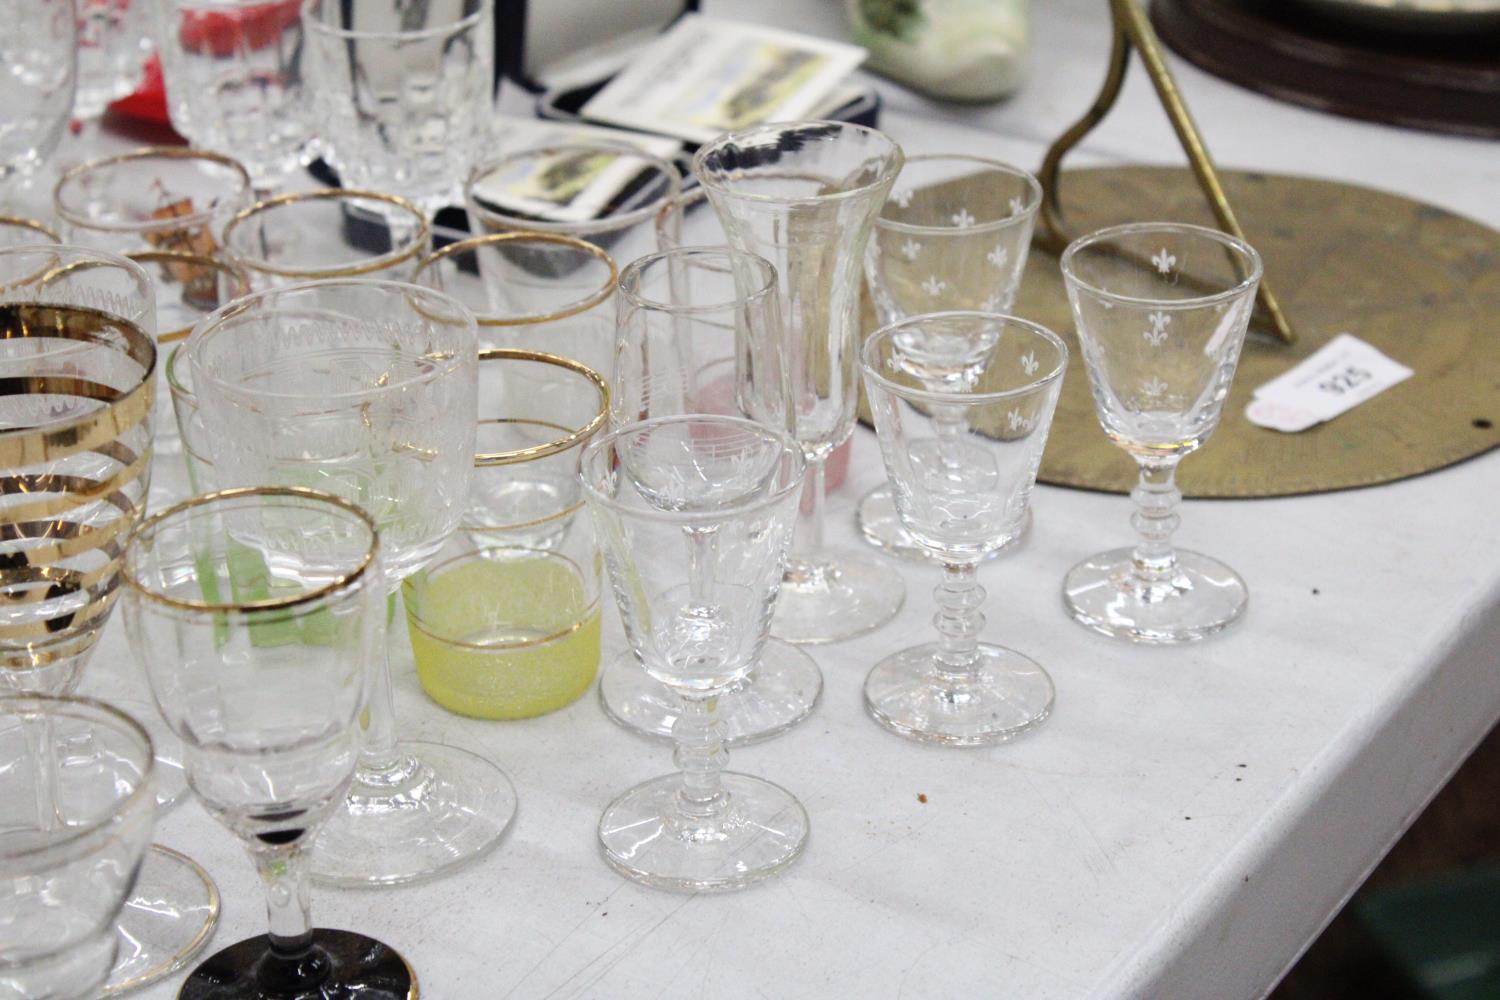 A QUANTITY OF GLASSWARE TO INCLUDE SHOT GLASSES, BEER GLASSES, WINE GLASSES, SHERRY GLASSES ETC - Image 4 of 6